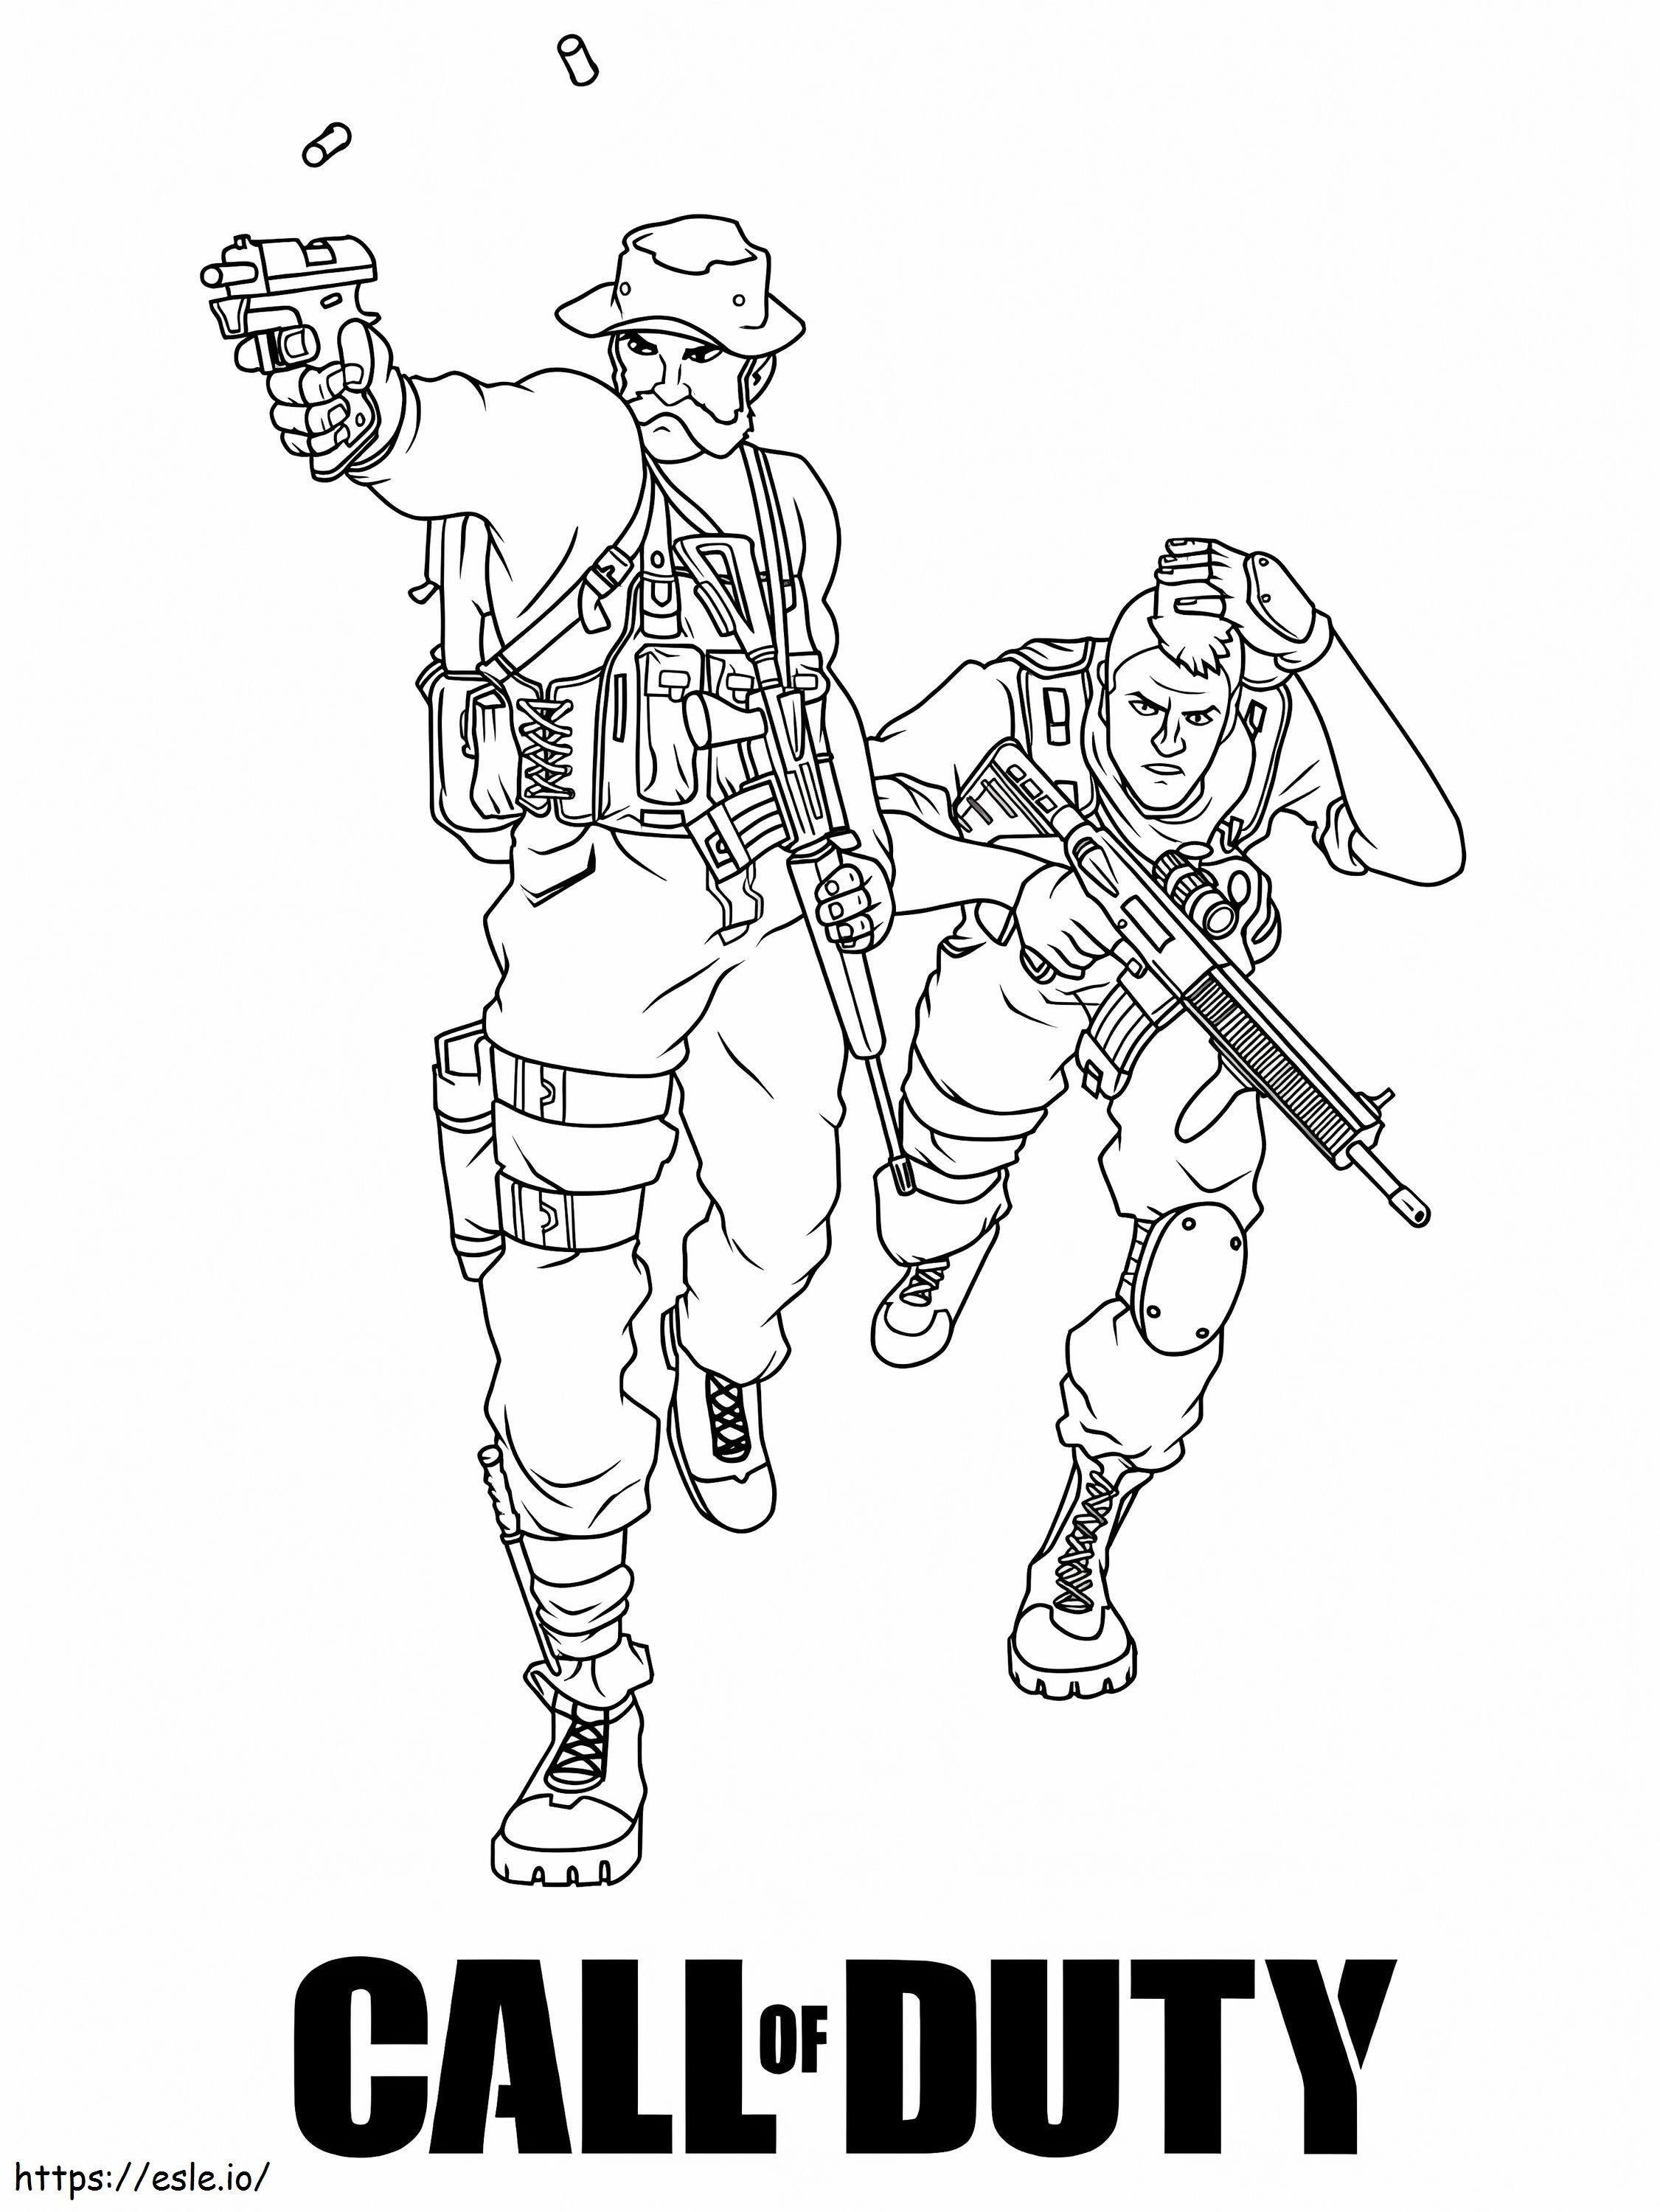 Call Of Duty 1 coloring page